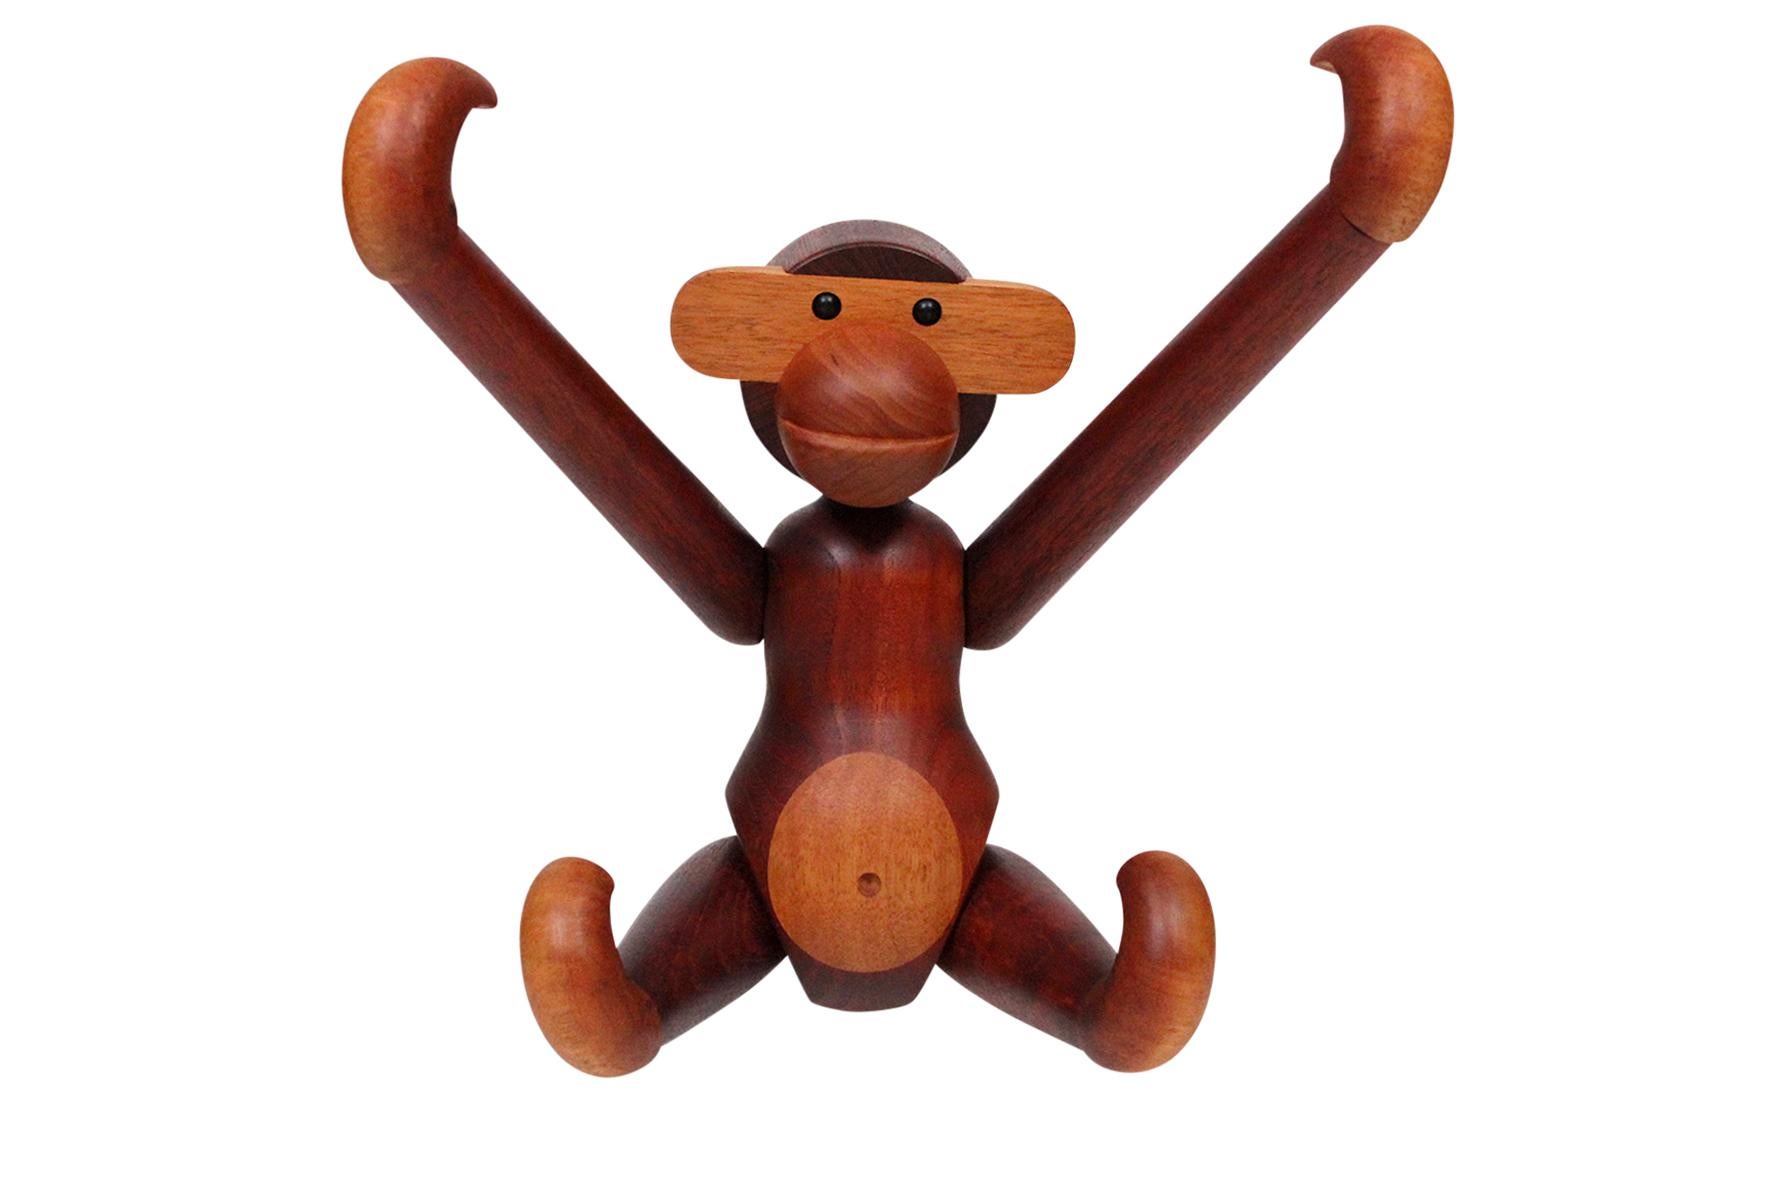 Large monkey by Kay Bojesen. Originally designed, 1951.

Kay Bojesen’s monkey comprises 31 parts and is made of limba wood and sustainable teak. Each one is produced in Denmark, and is absolutely unique.